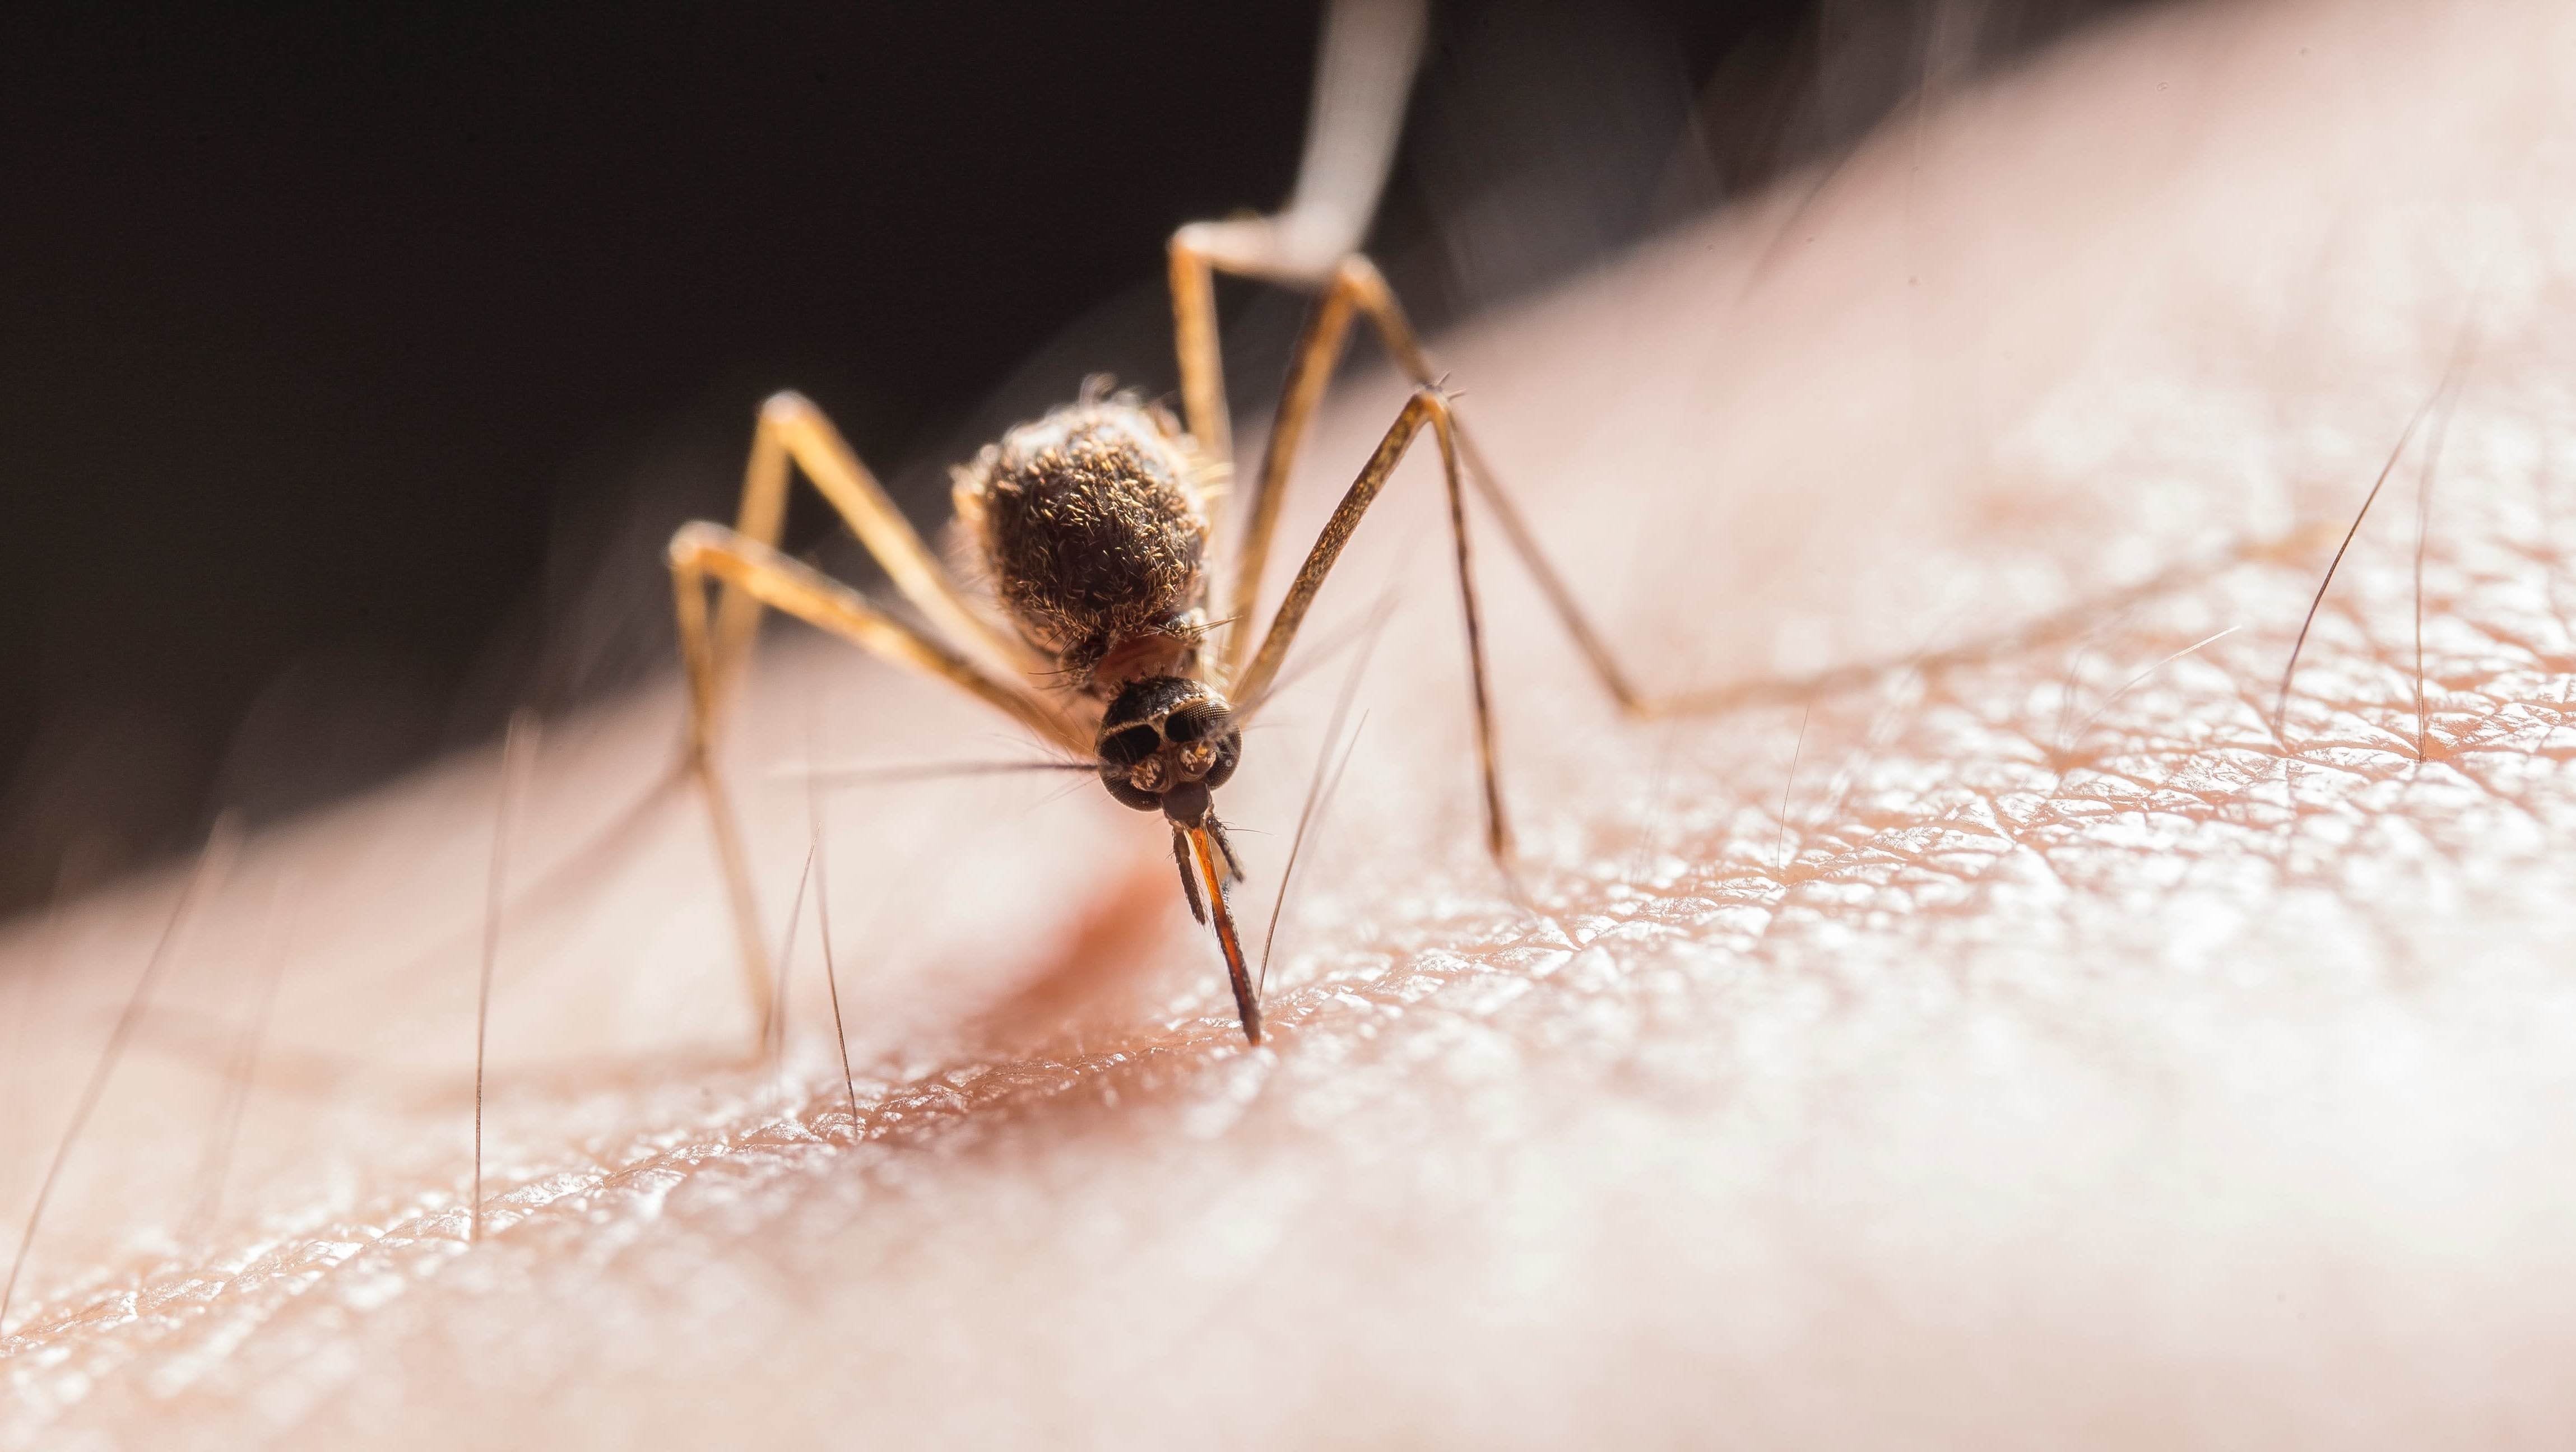 How To Ease Mosquito Bite Symptoms